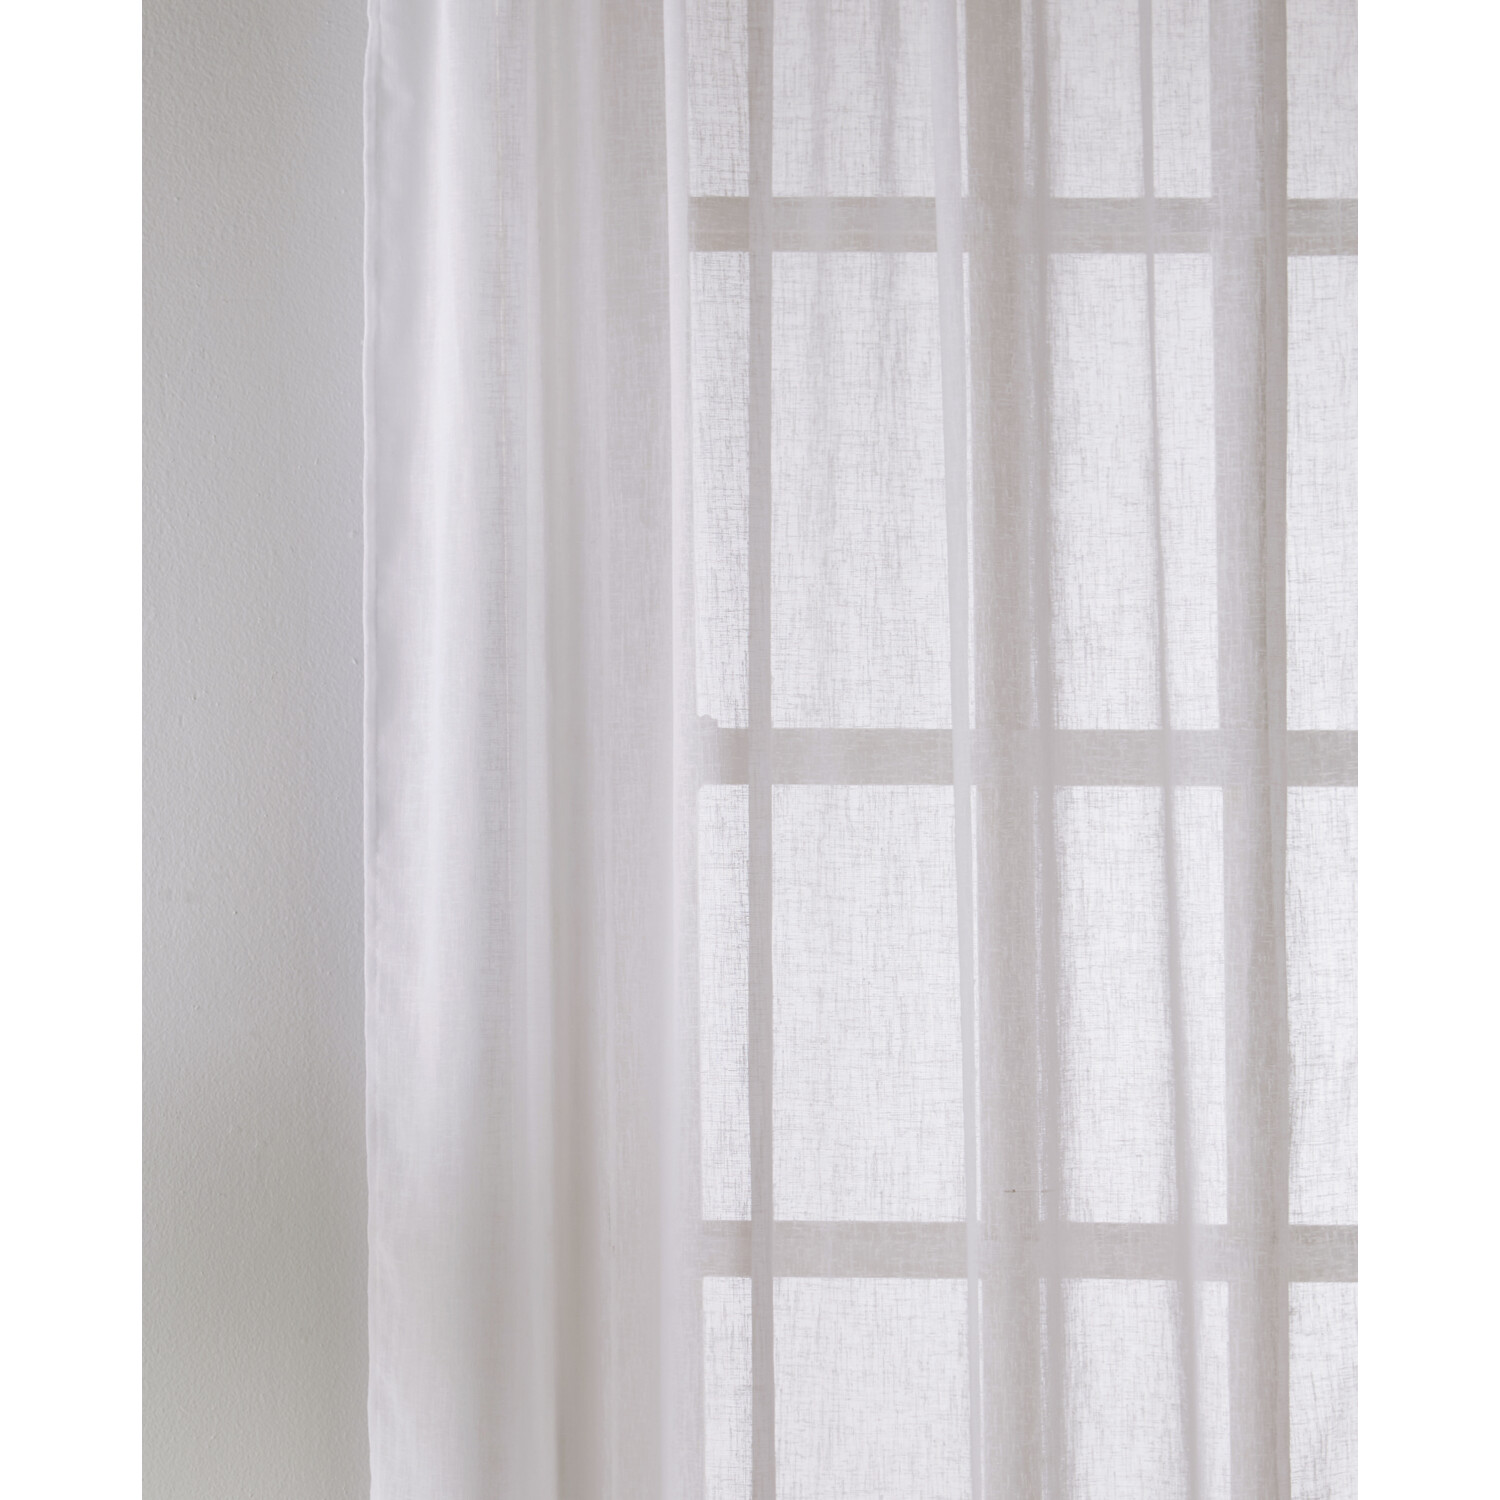 Eden Recycled Textured Voile - White / 229cm Image 2